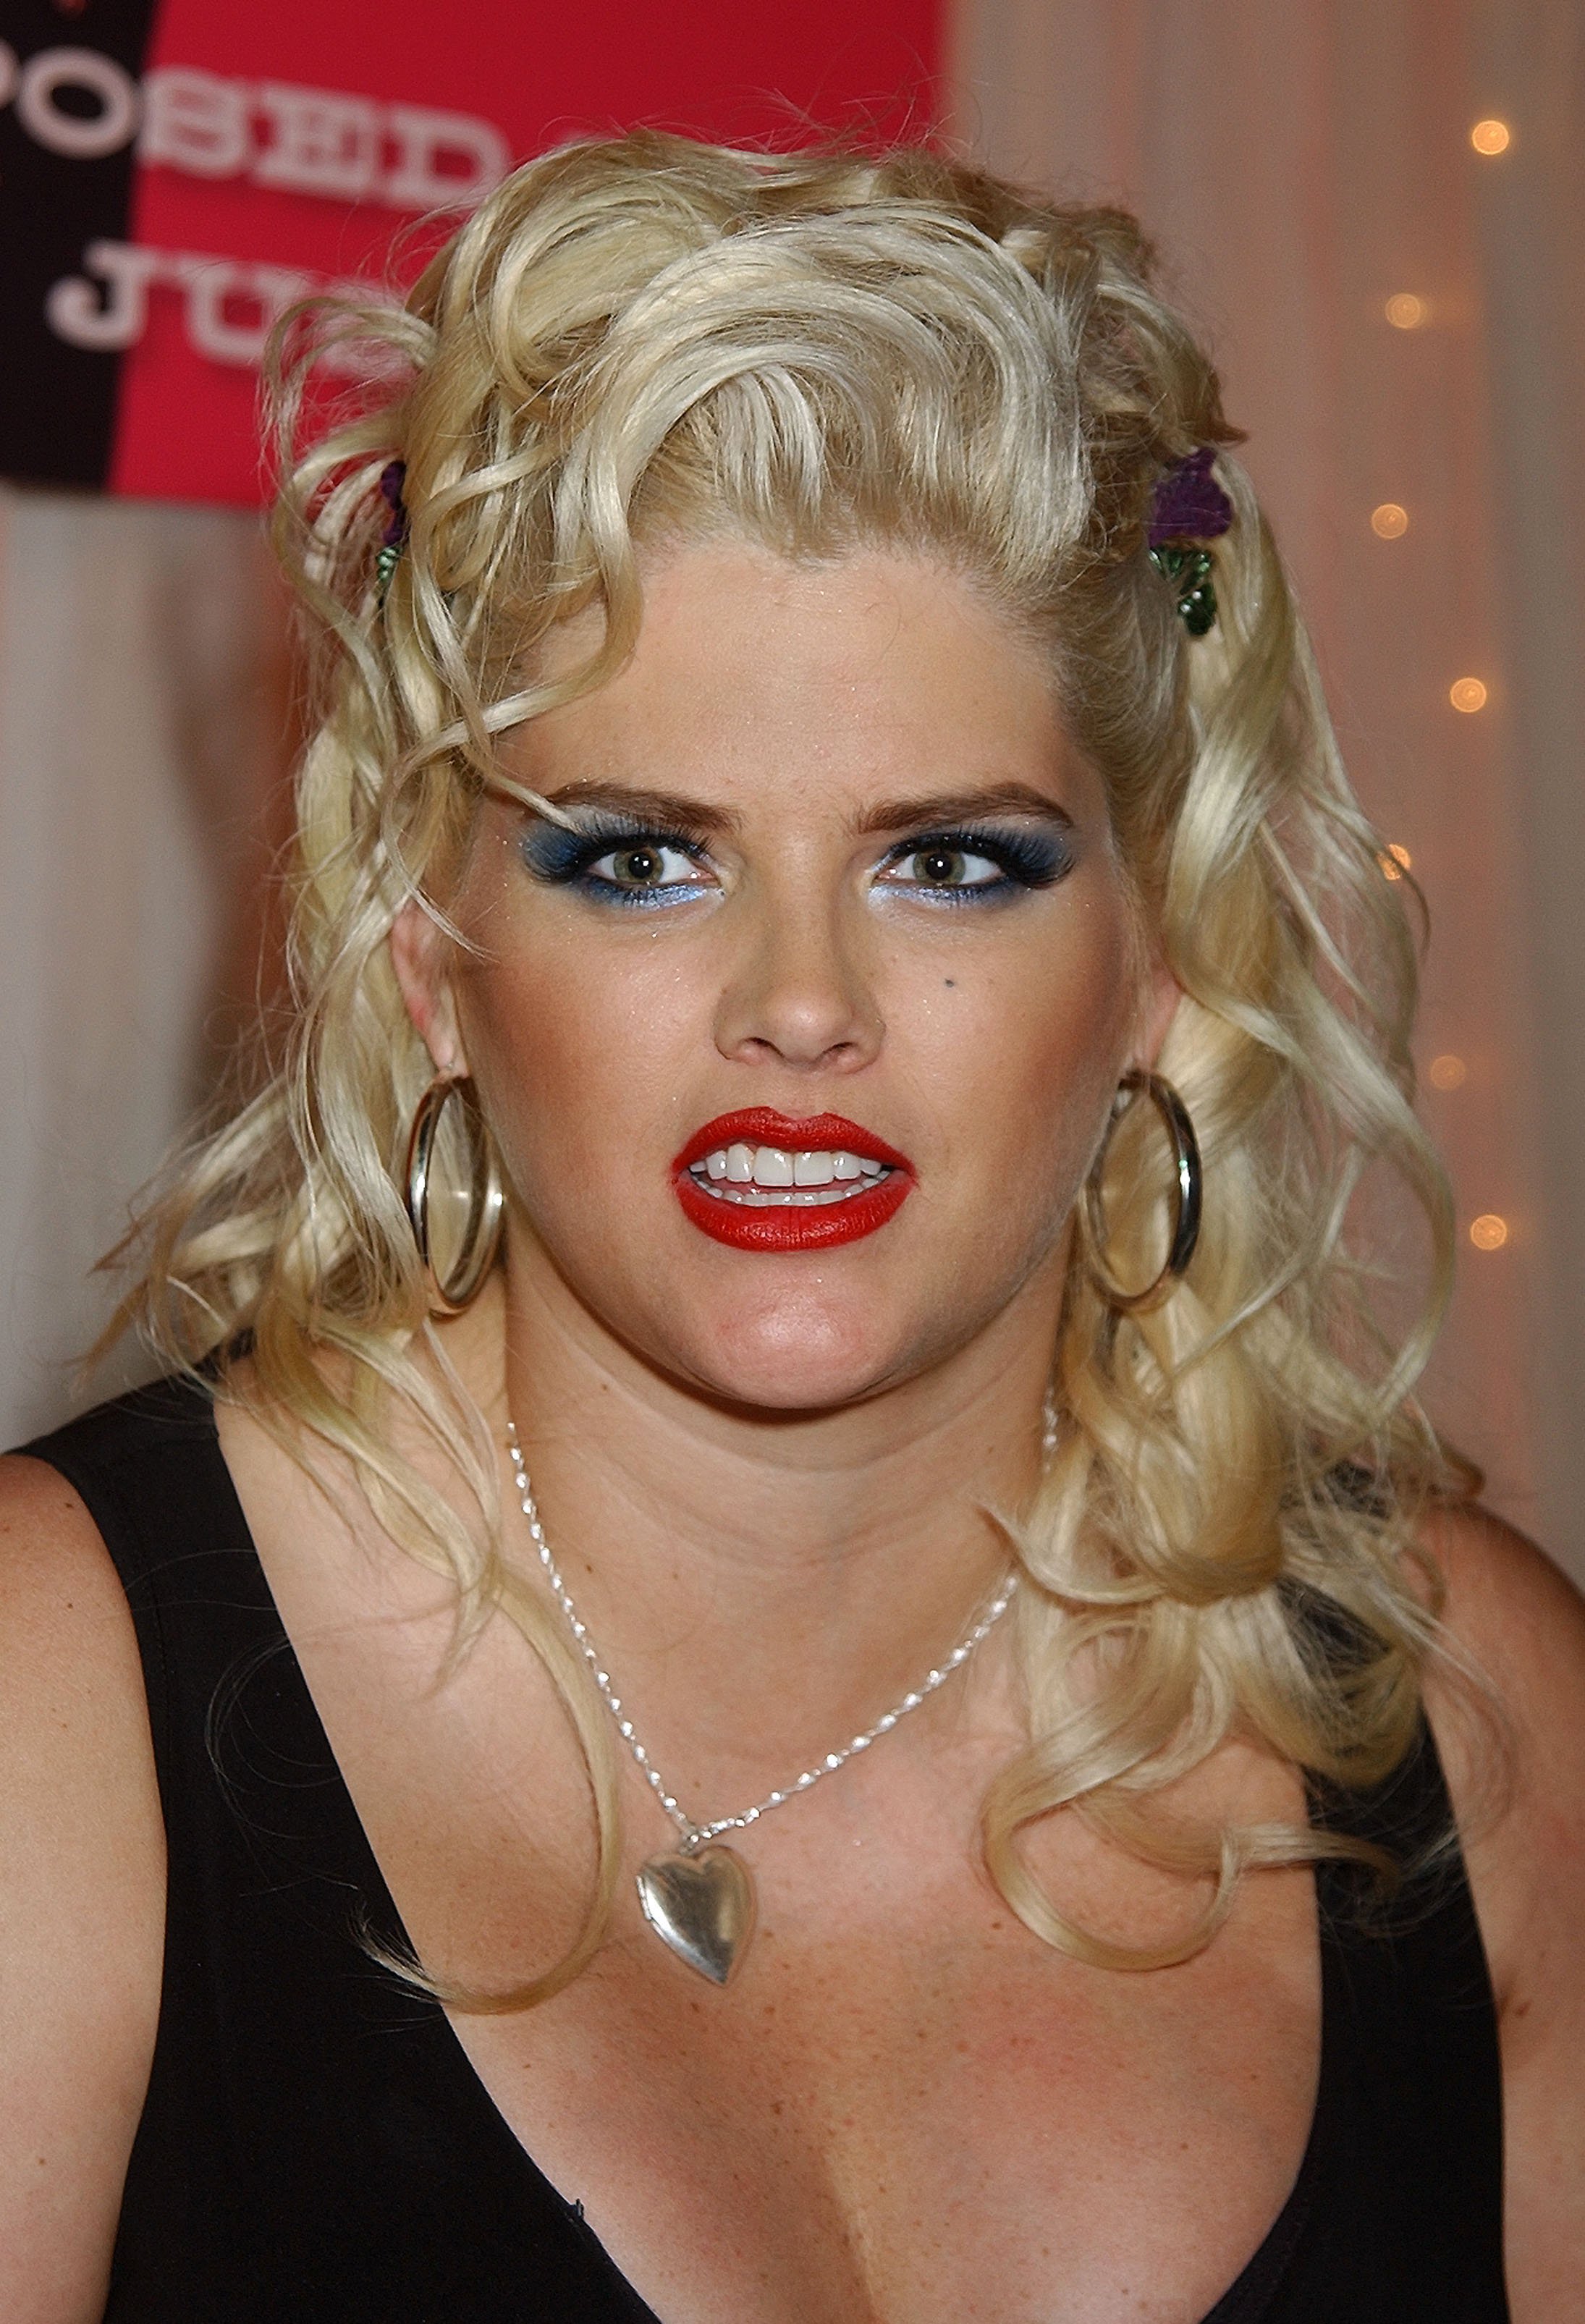 Anna Nicole Smith during National Cable & Telecommunications Association Press Tour at Ritz Carlton Pasadena in Pasadena, California, United States. | Source: Getty Images